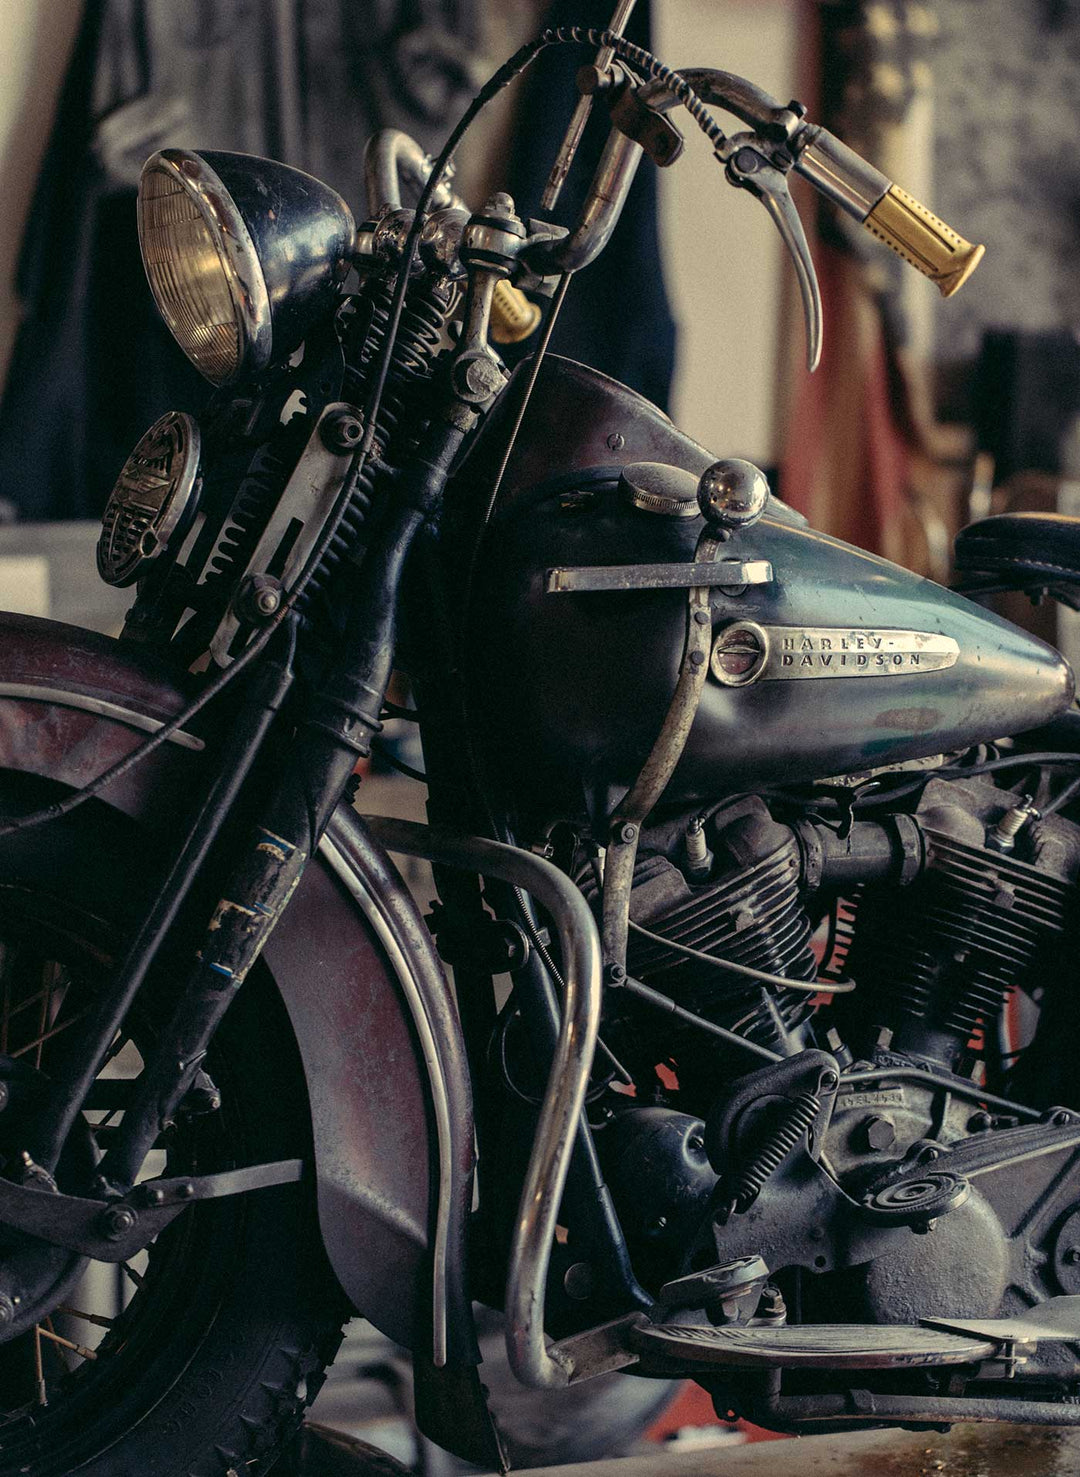 a close up of a motorcycle